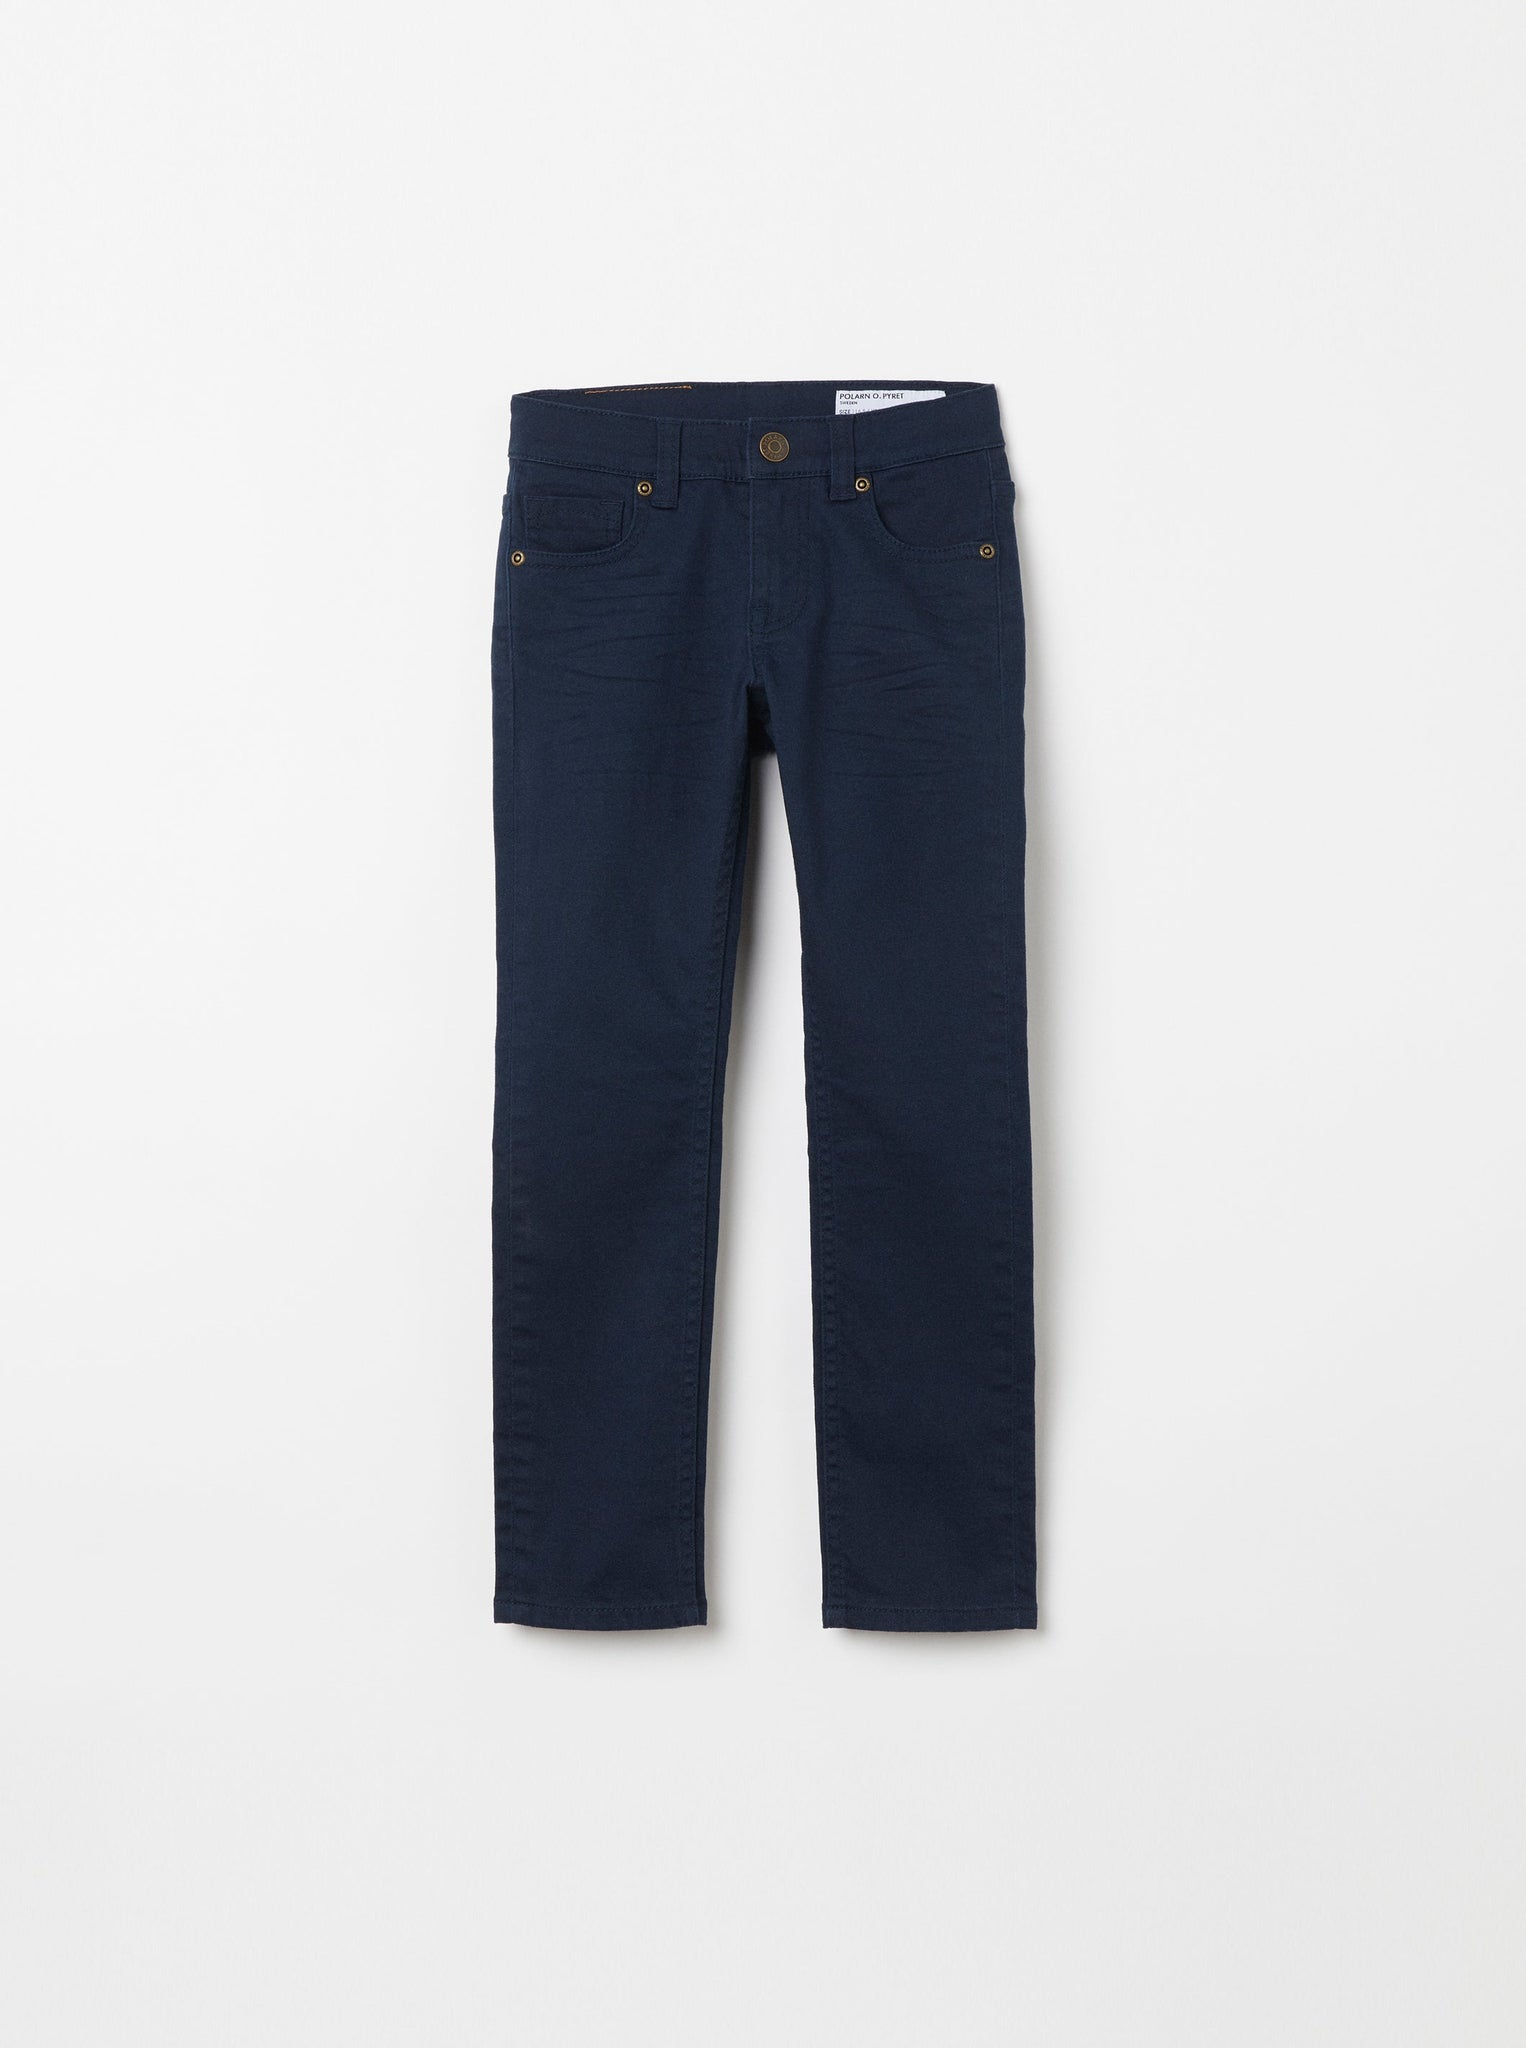 Organic Cotton Slim Fit Kids Jeans from the Polarn O. Pyret Kidswear collection. Ethically produced kids clothing.